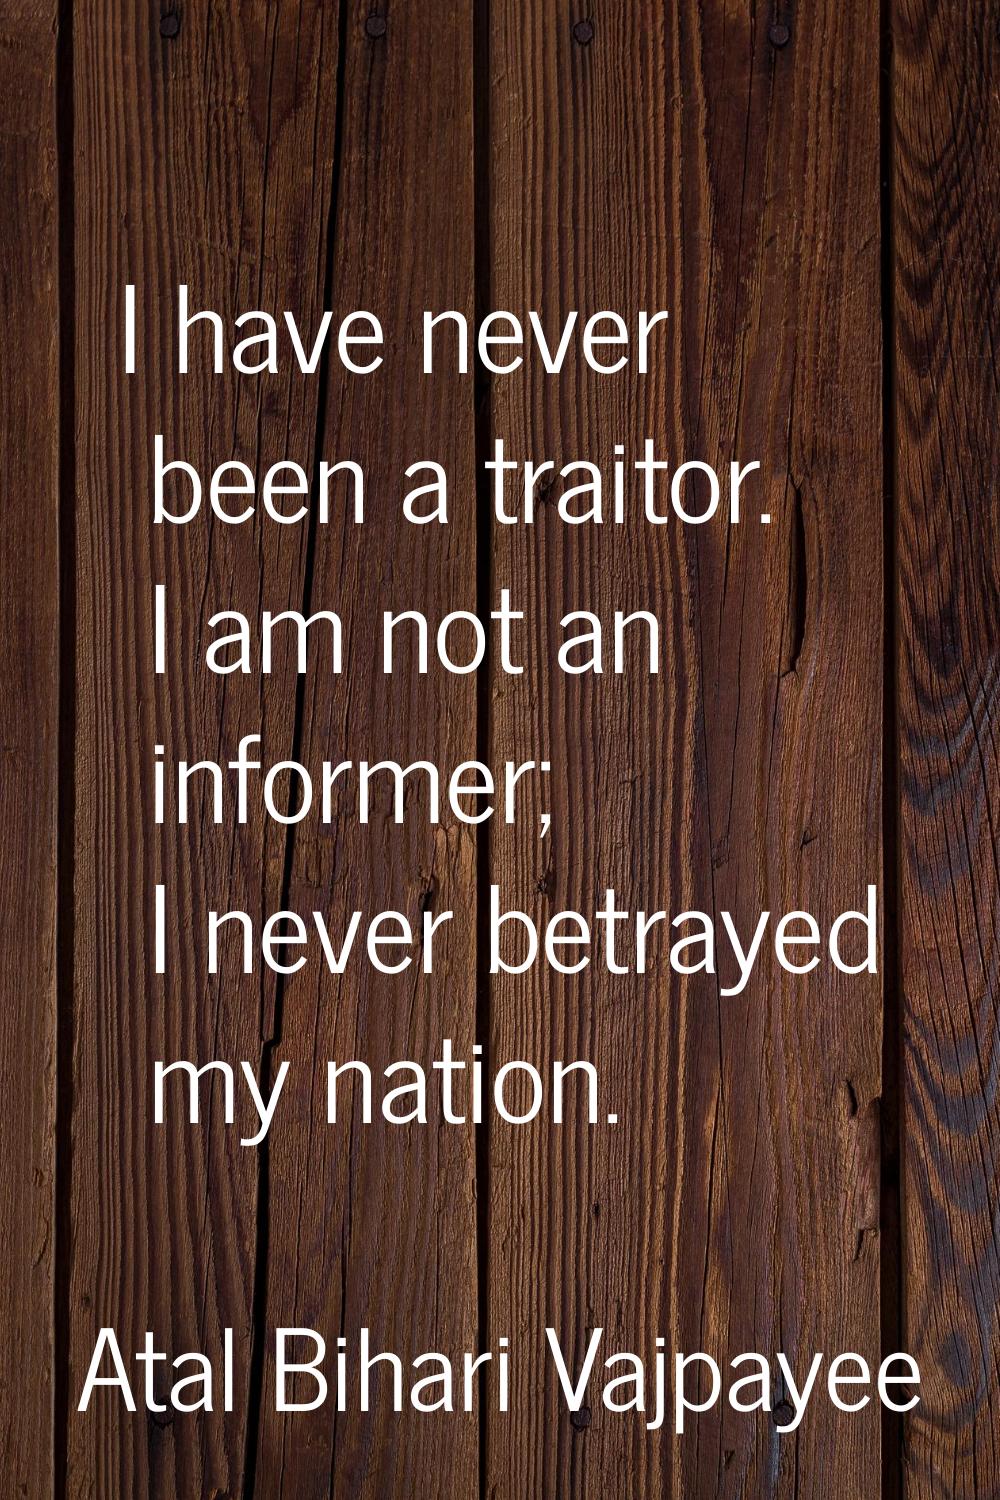 I have never been a traitor. I am not an informer; I never betrayed my nation.